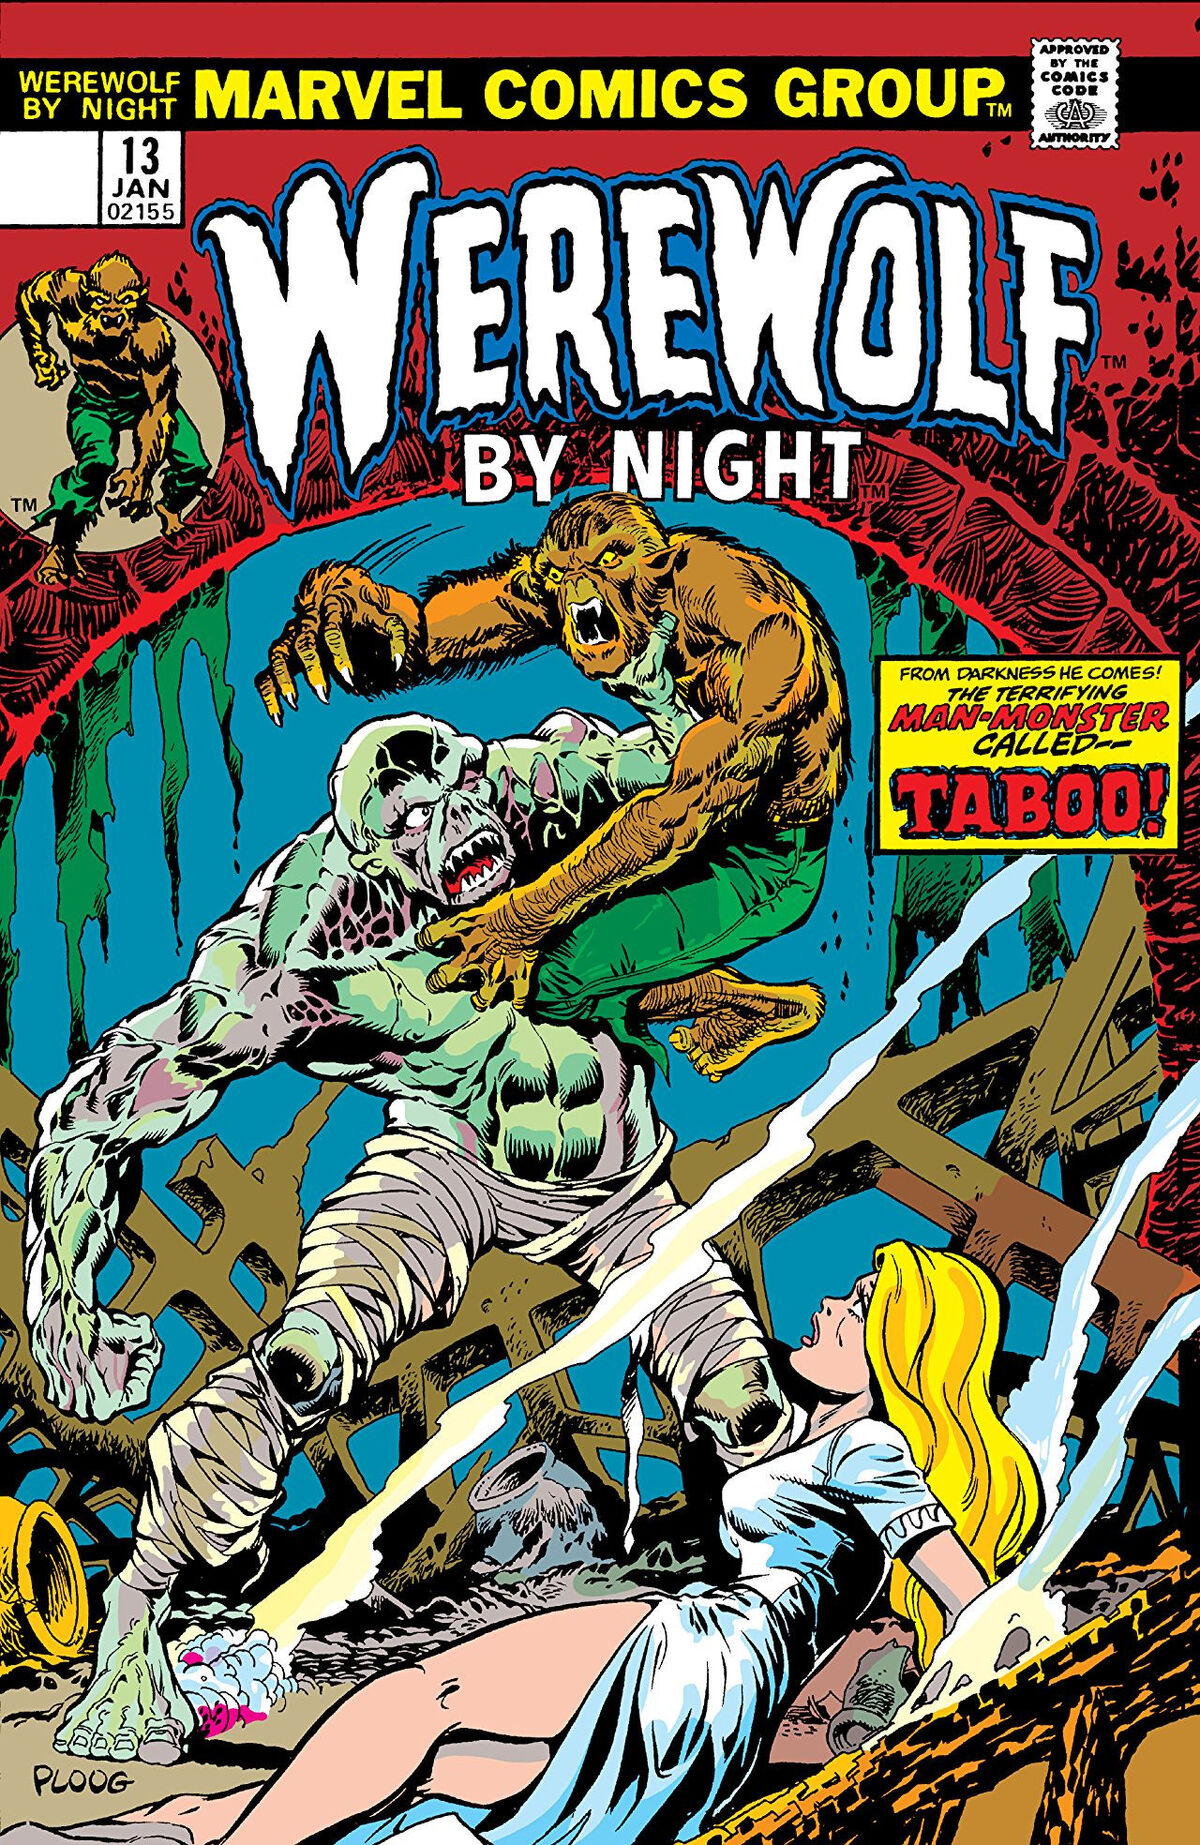 Marvel First Look: 'Werewolf by Night' #1 trailer features Taboo